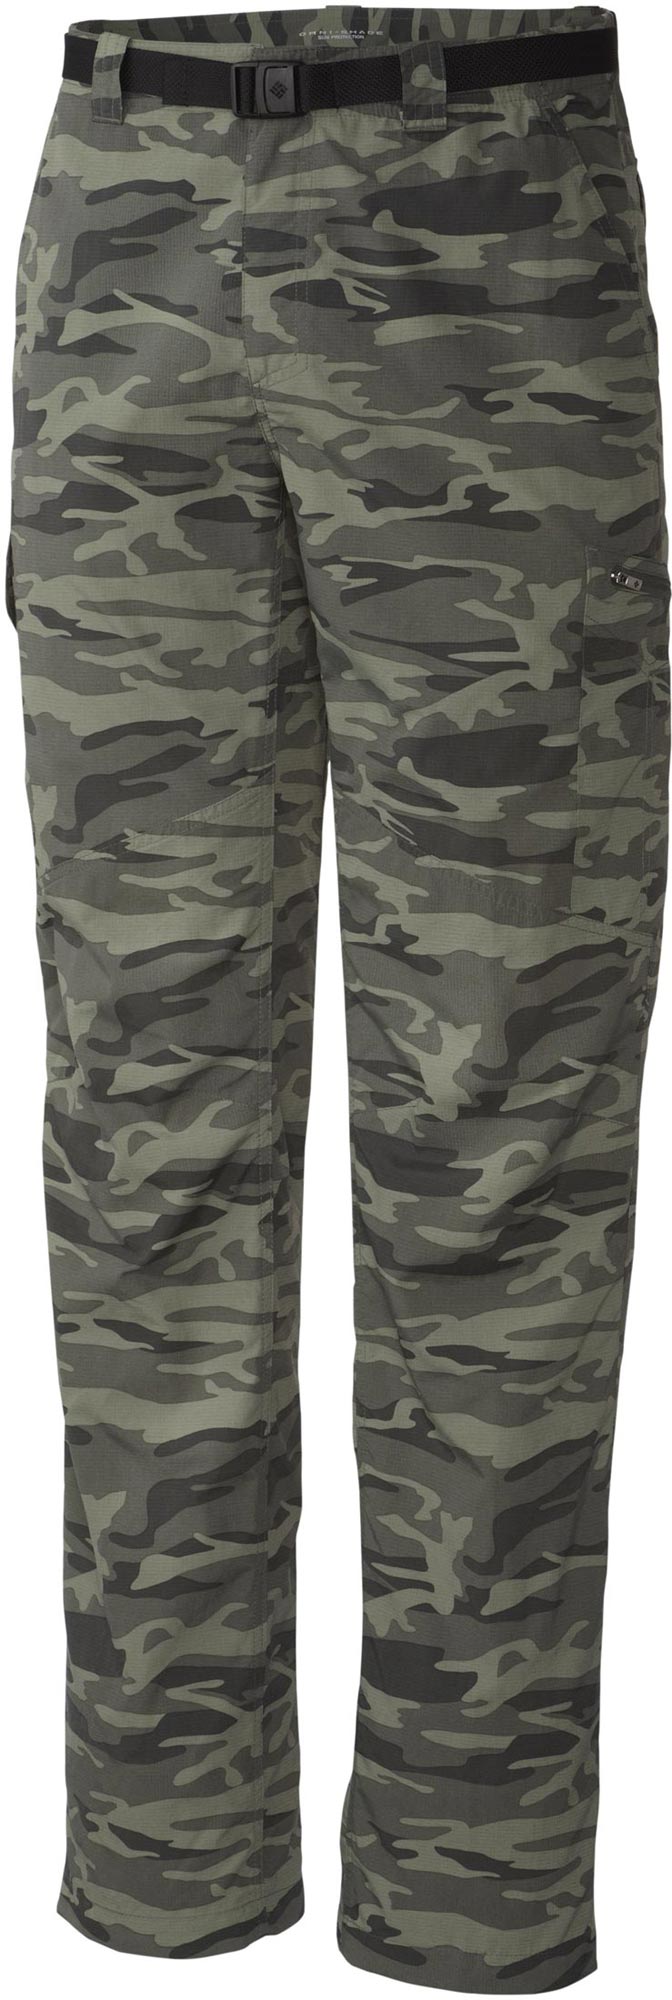 Silver Camo On Grey Joggers Pant